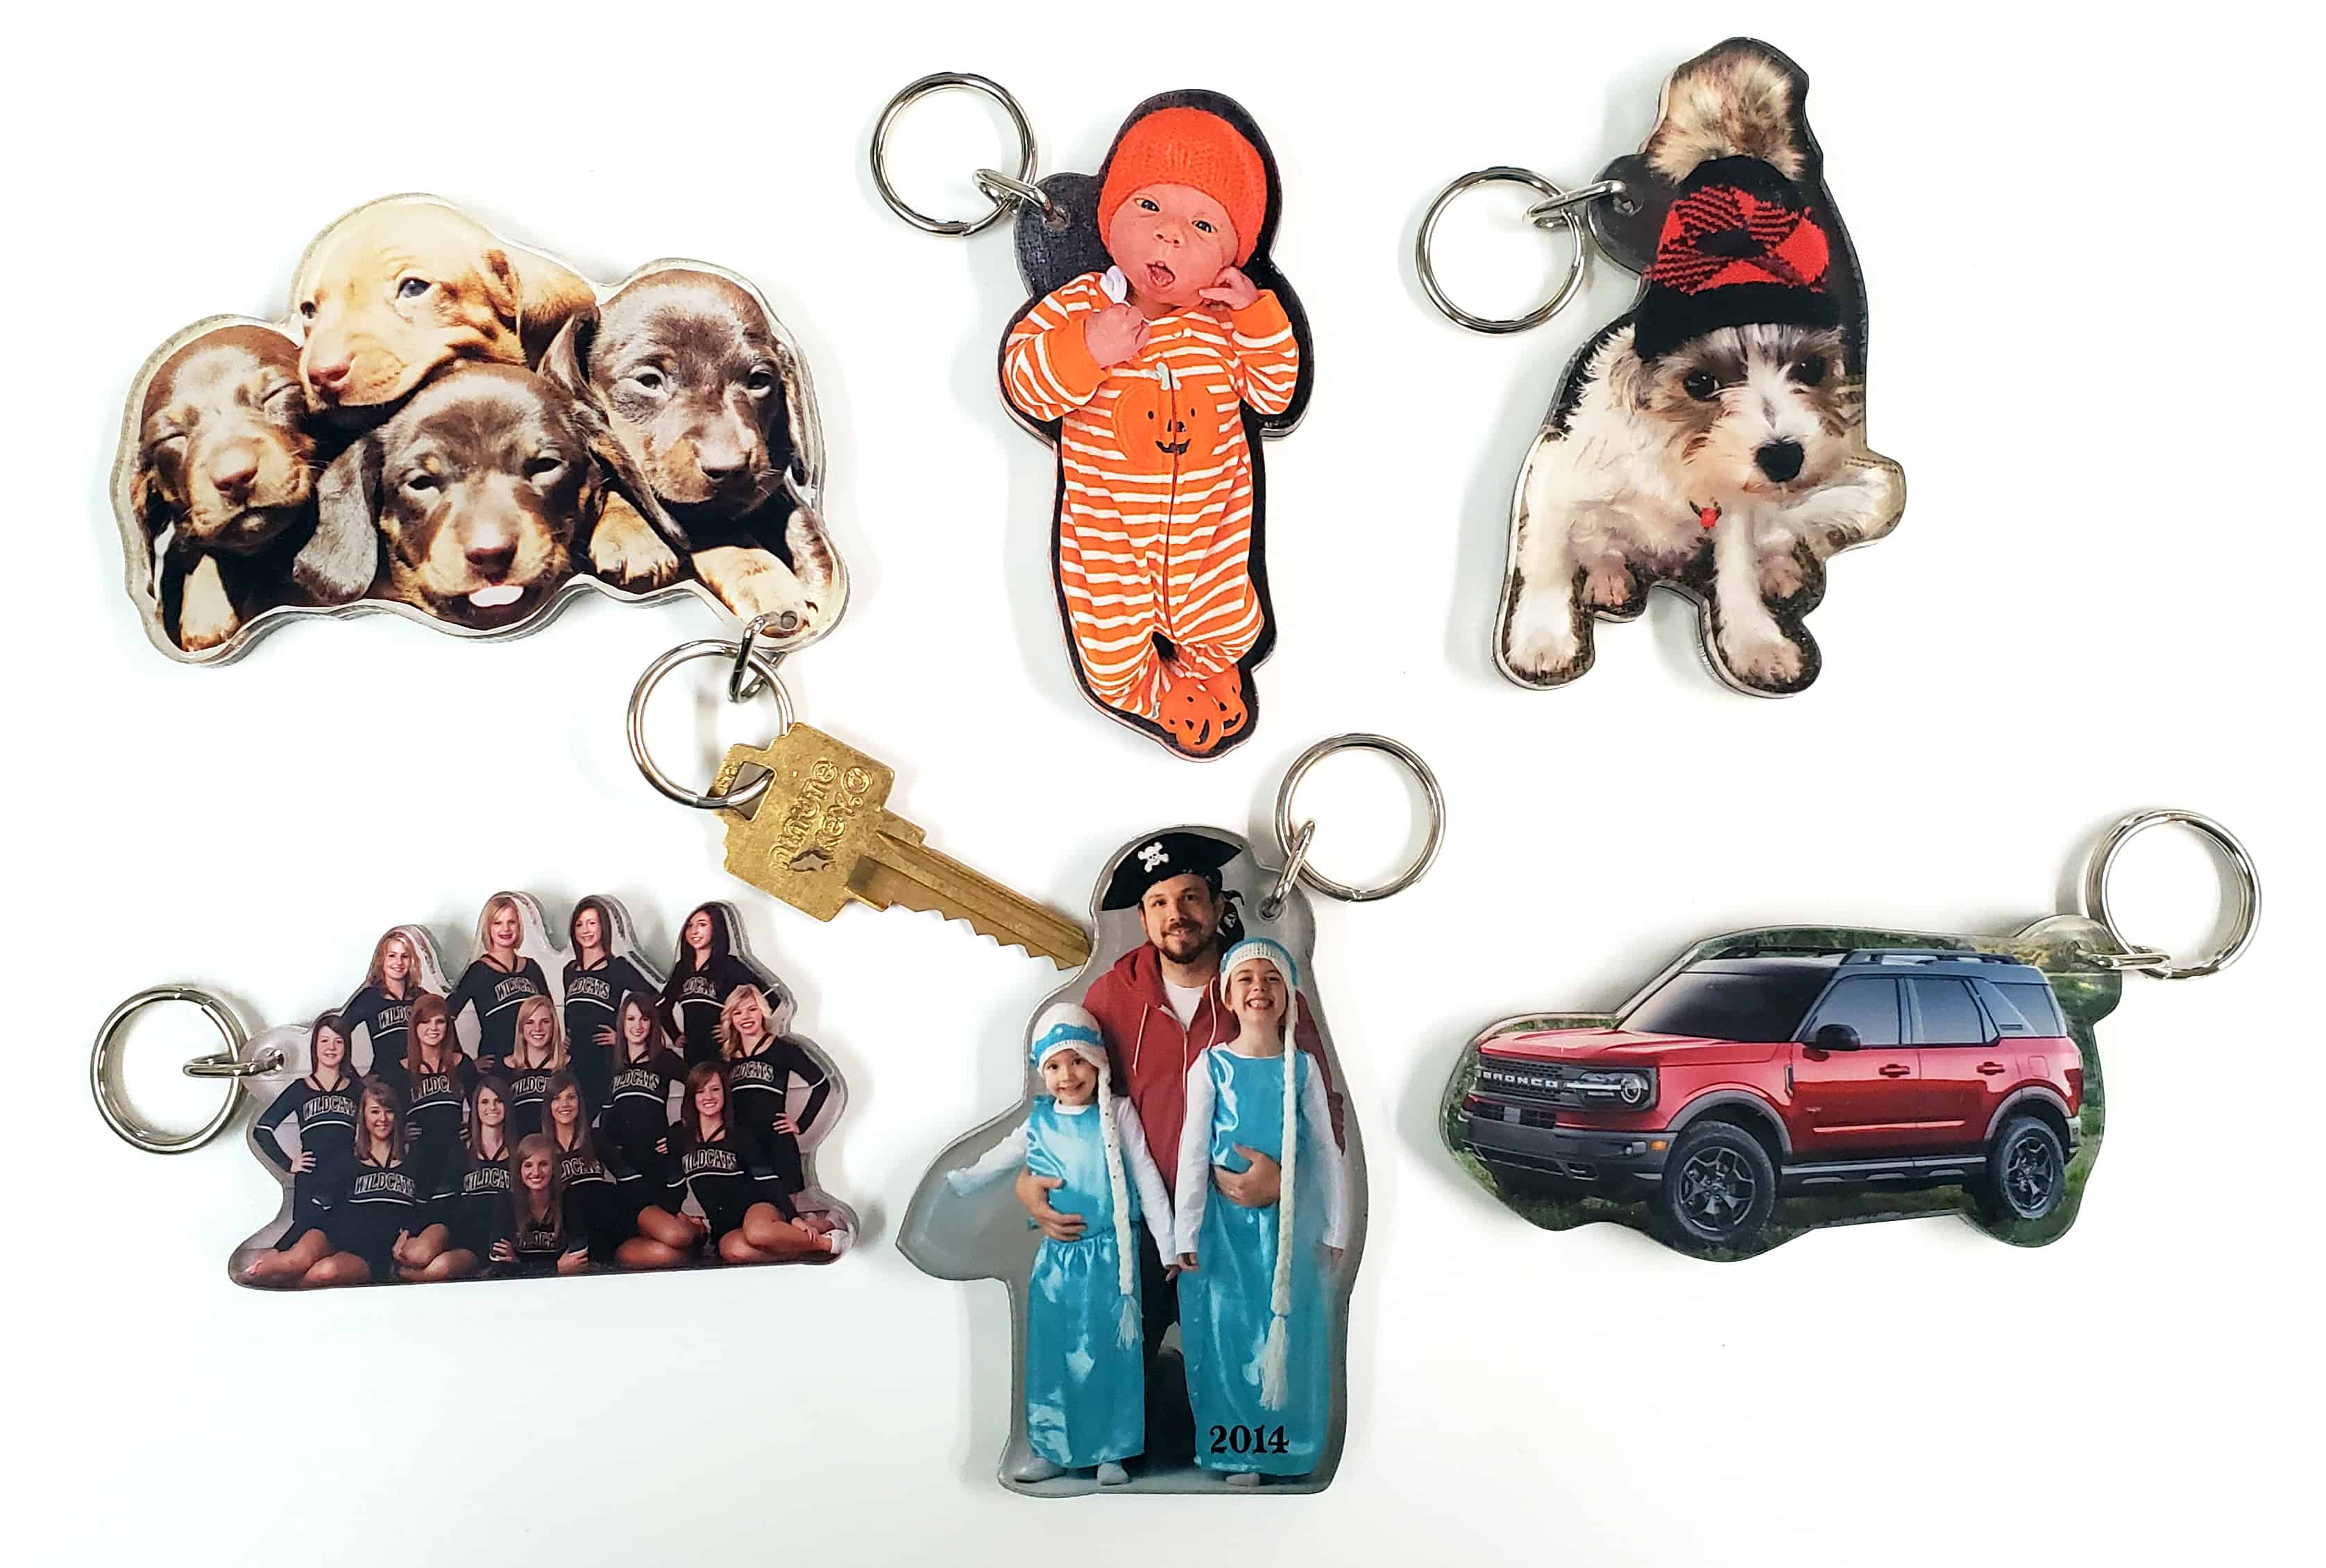 Examples of photo keychains made from your photos